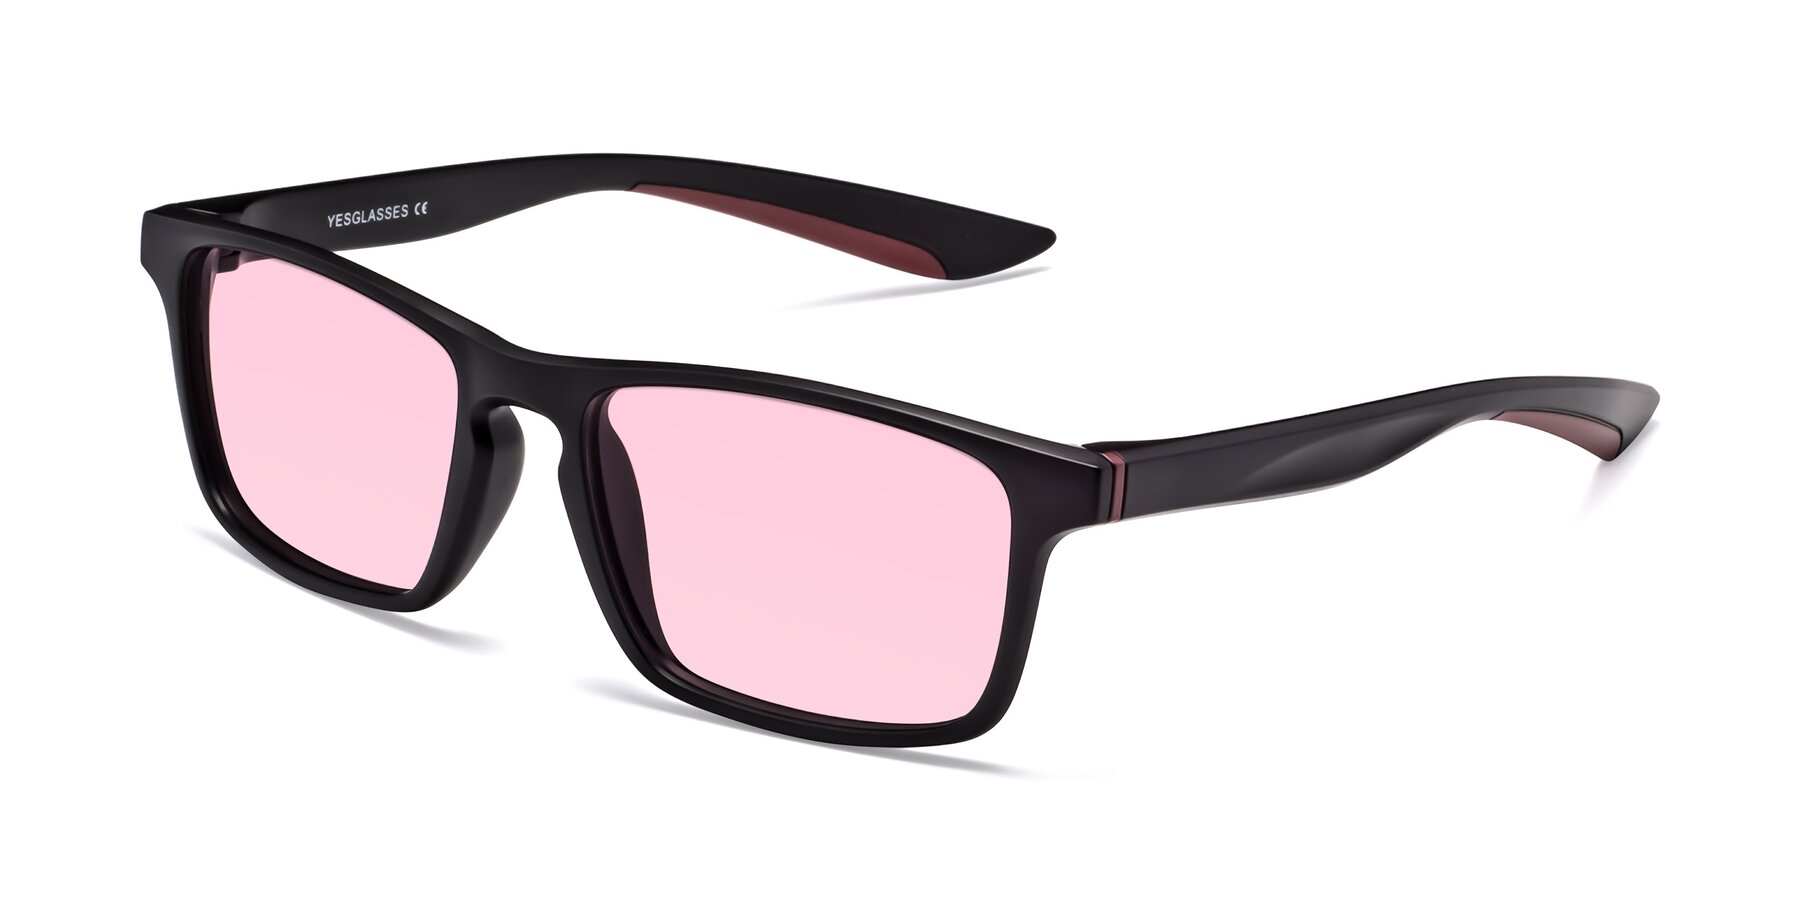 Angle of Passion in Matte Black-Wine with Light Pink Tinted Lenses